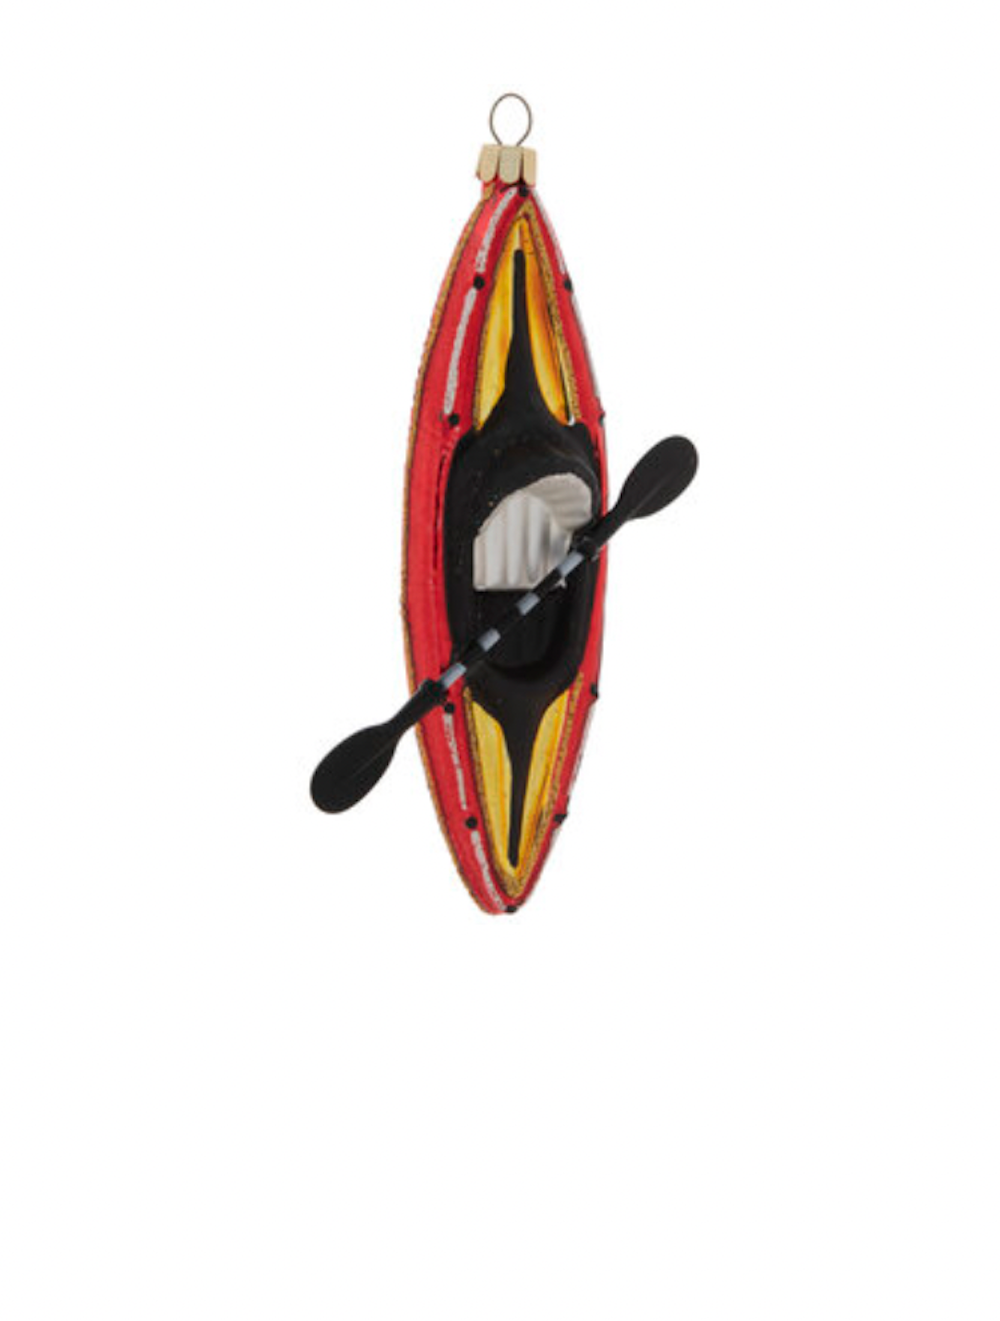 Robert Stanley Red Kayak Glass Christmas Ornament New with Tag